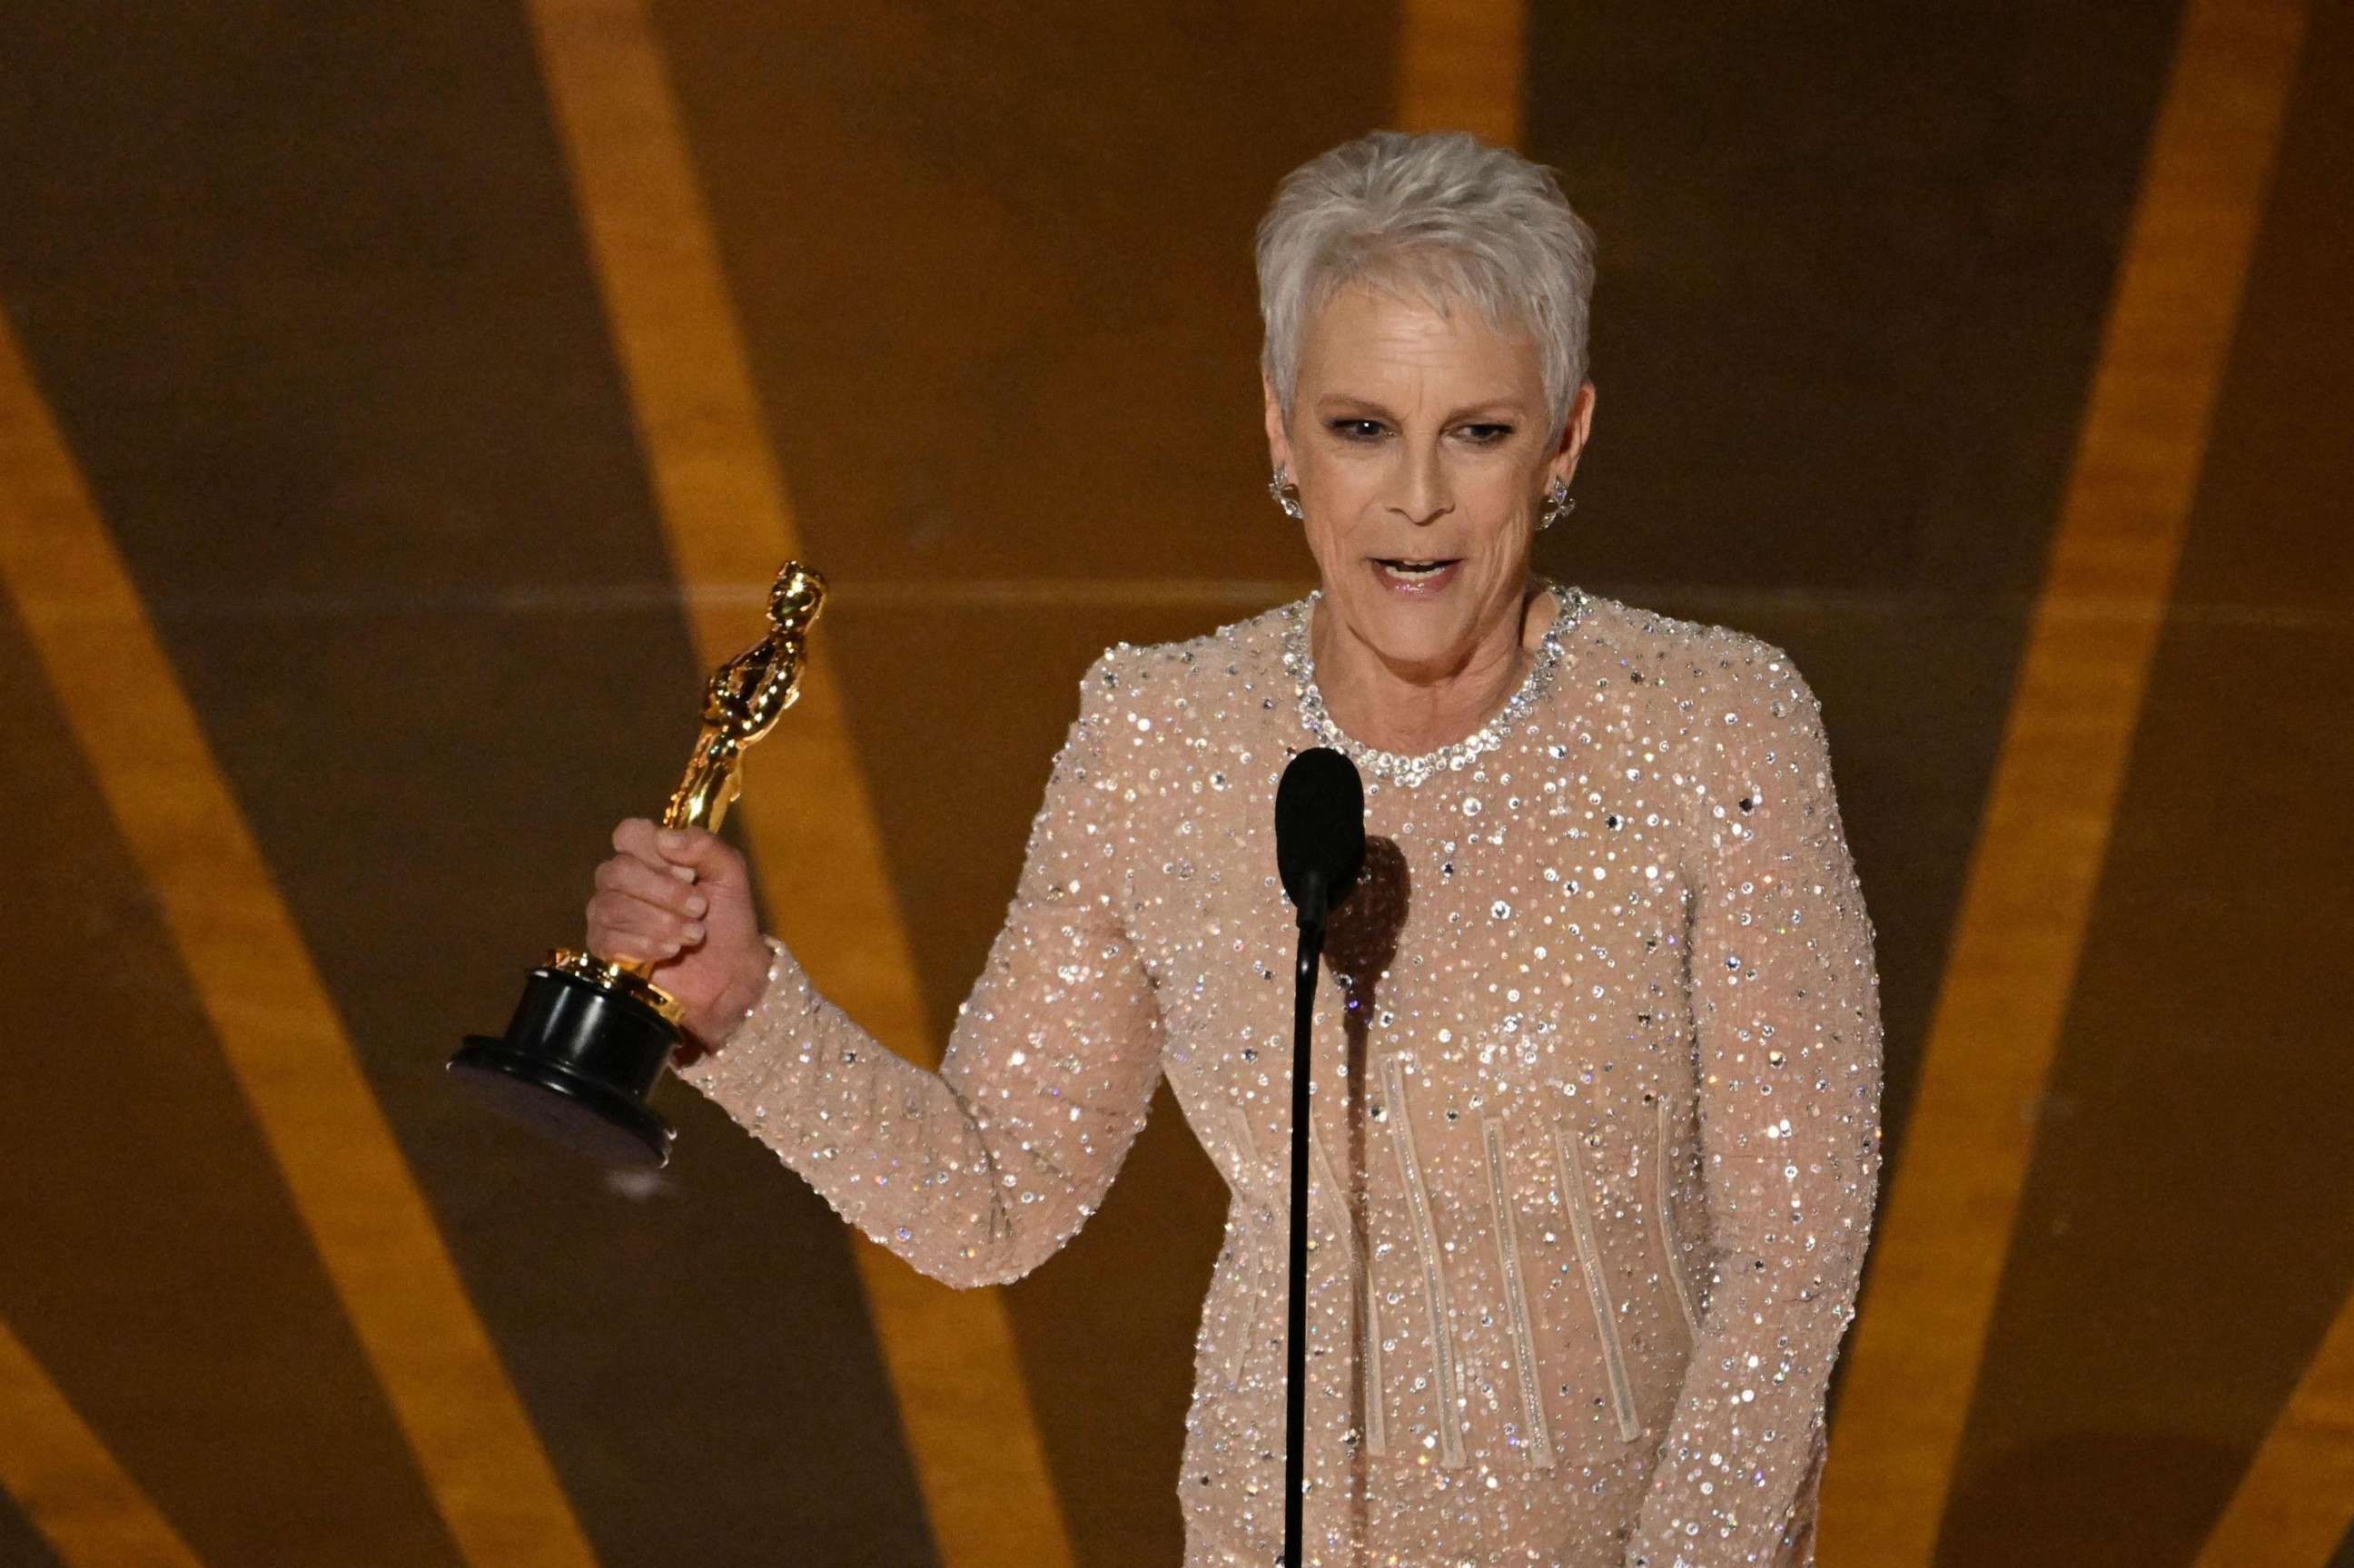 PHOTO: Jamie Lee Curtis accepts the Oscar for Best Actress in a Supporting Role for "Everything Everywhere All at Once" onstage during the 95th Annual Academy Awards at the Dolby Theatre in Hollywood, California on March 12, 2023.